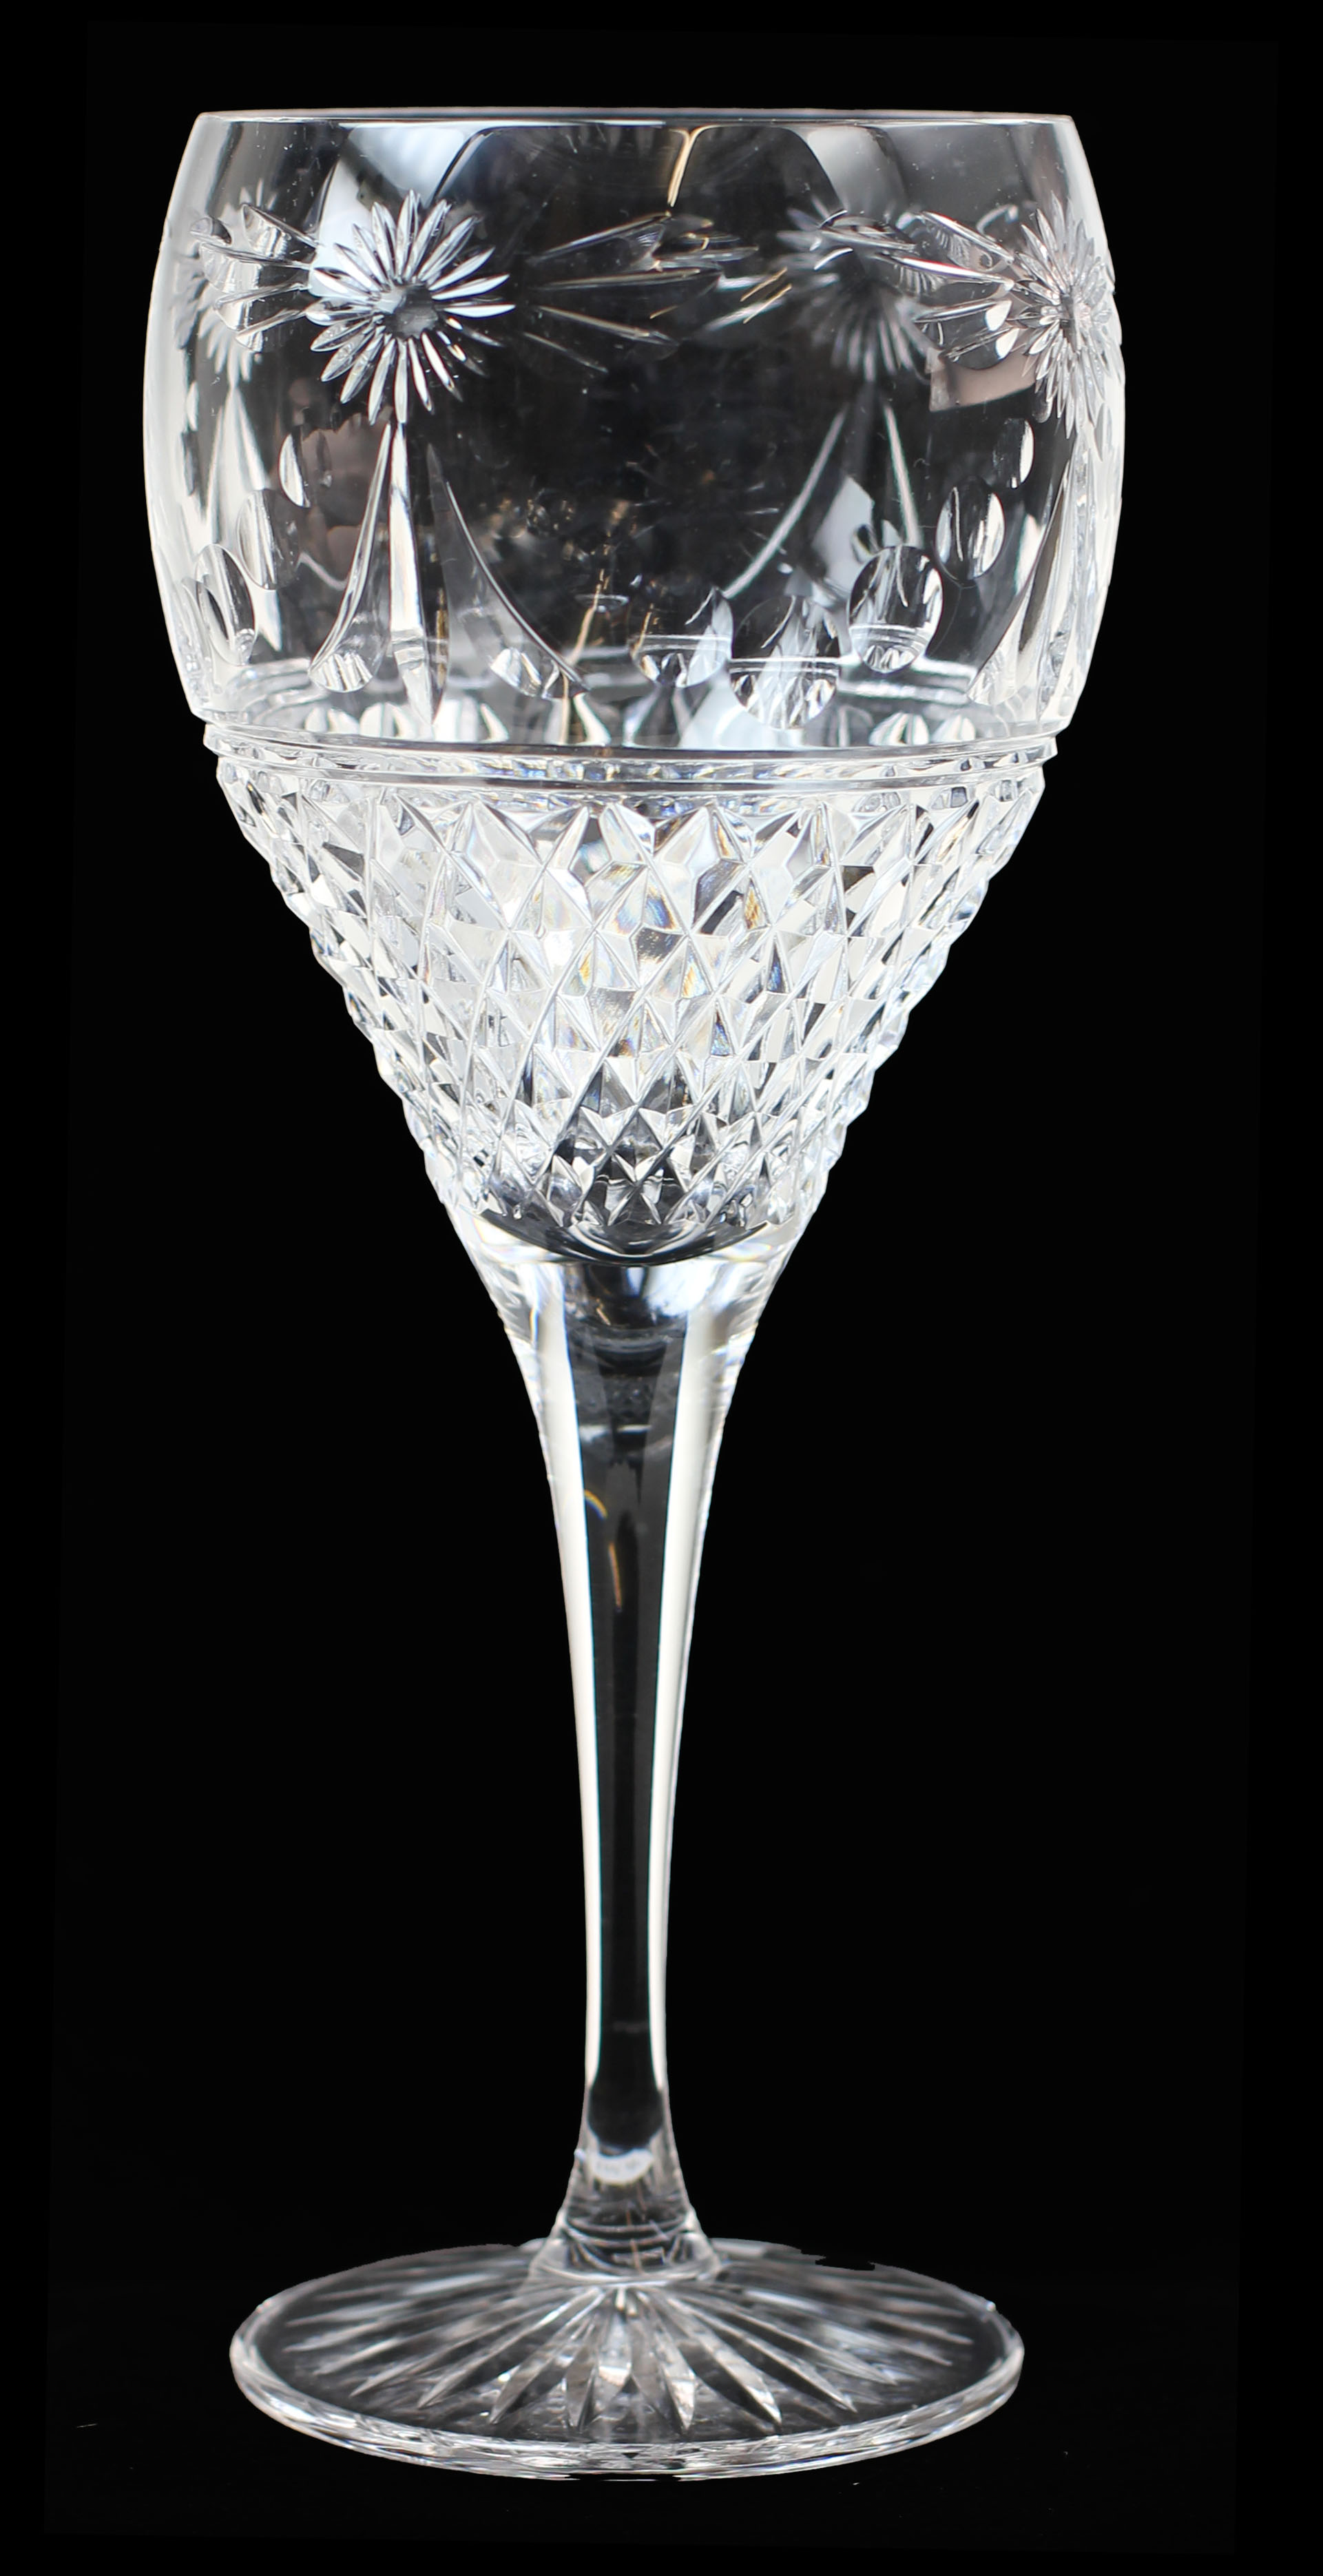 Handmade full lead crystal wine glass/goblet in our Beaconsfield design